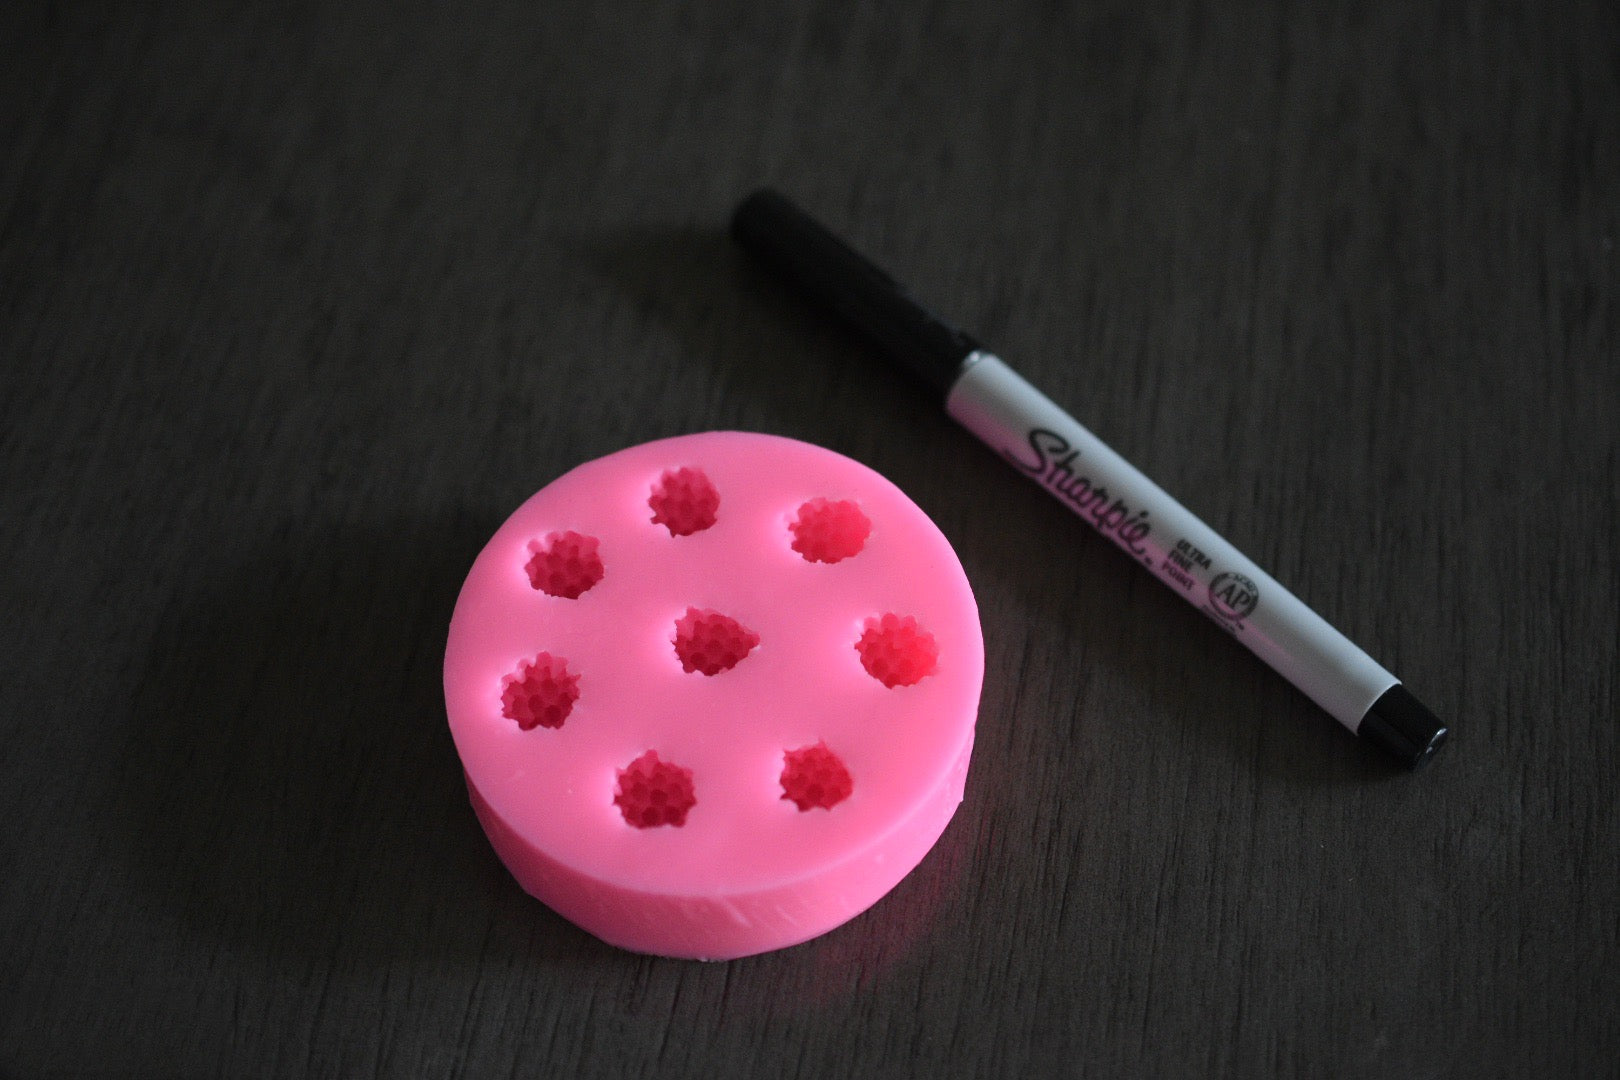 A top view of the black berry mold. It is next to a sharpie pen for size comparison. The sharpie is moderately longer than the mold in length. The soap mold is pink.